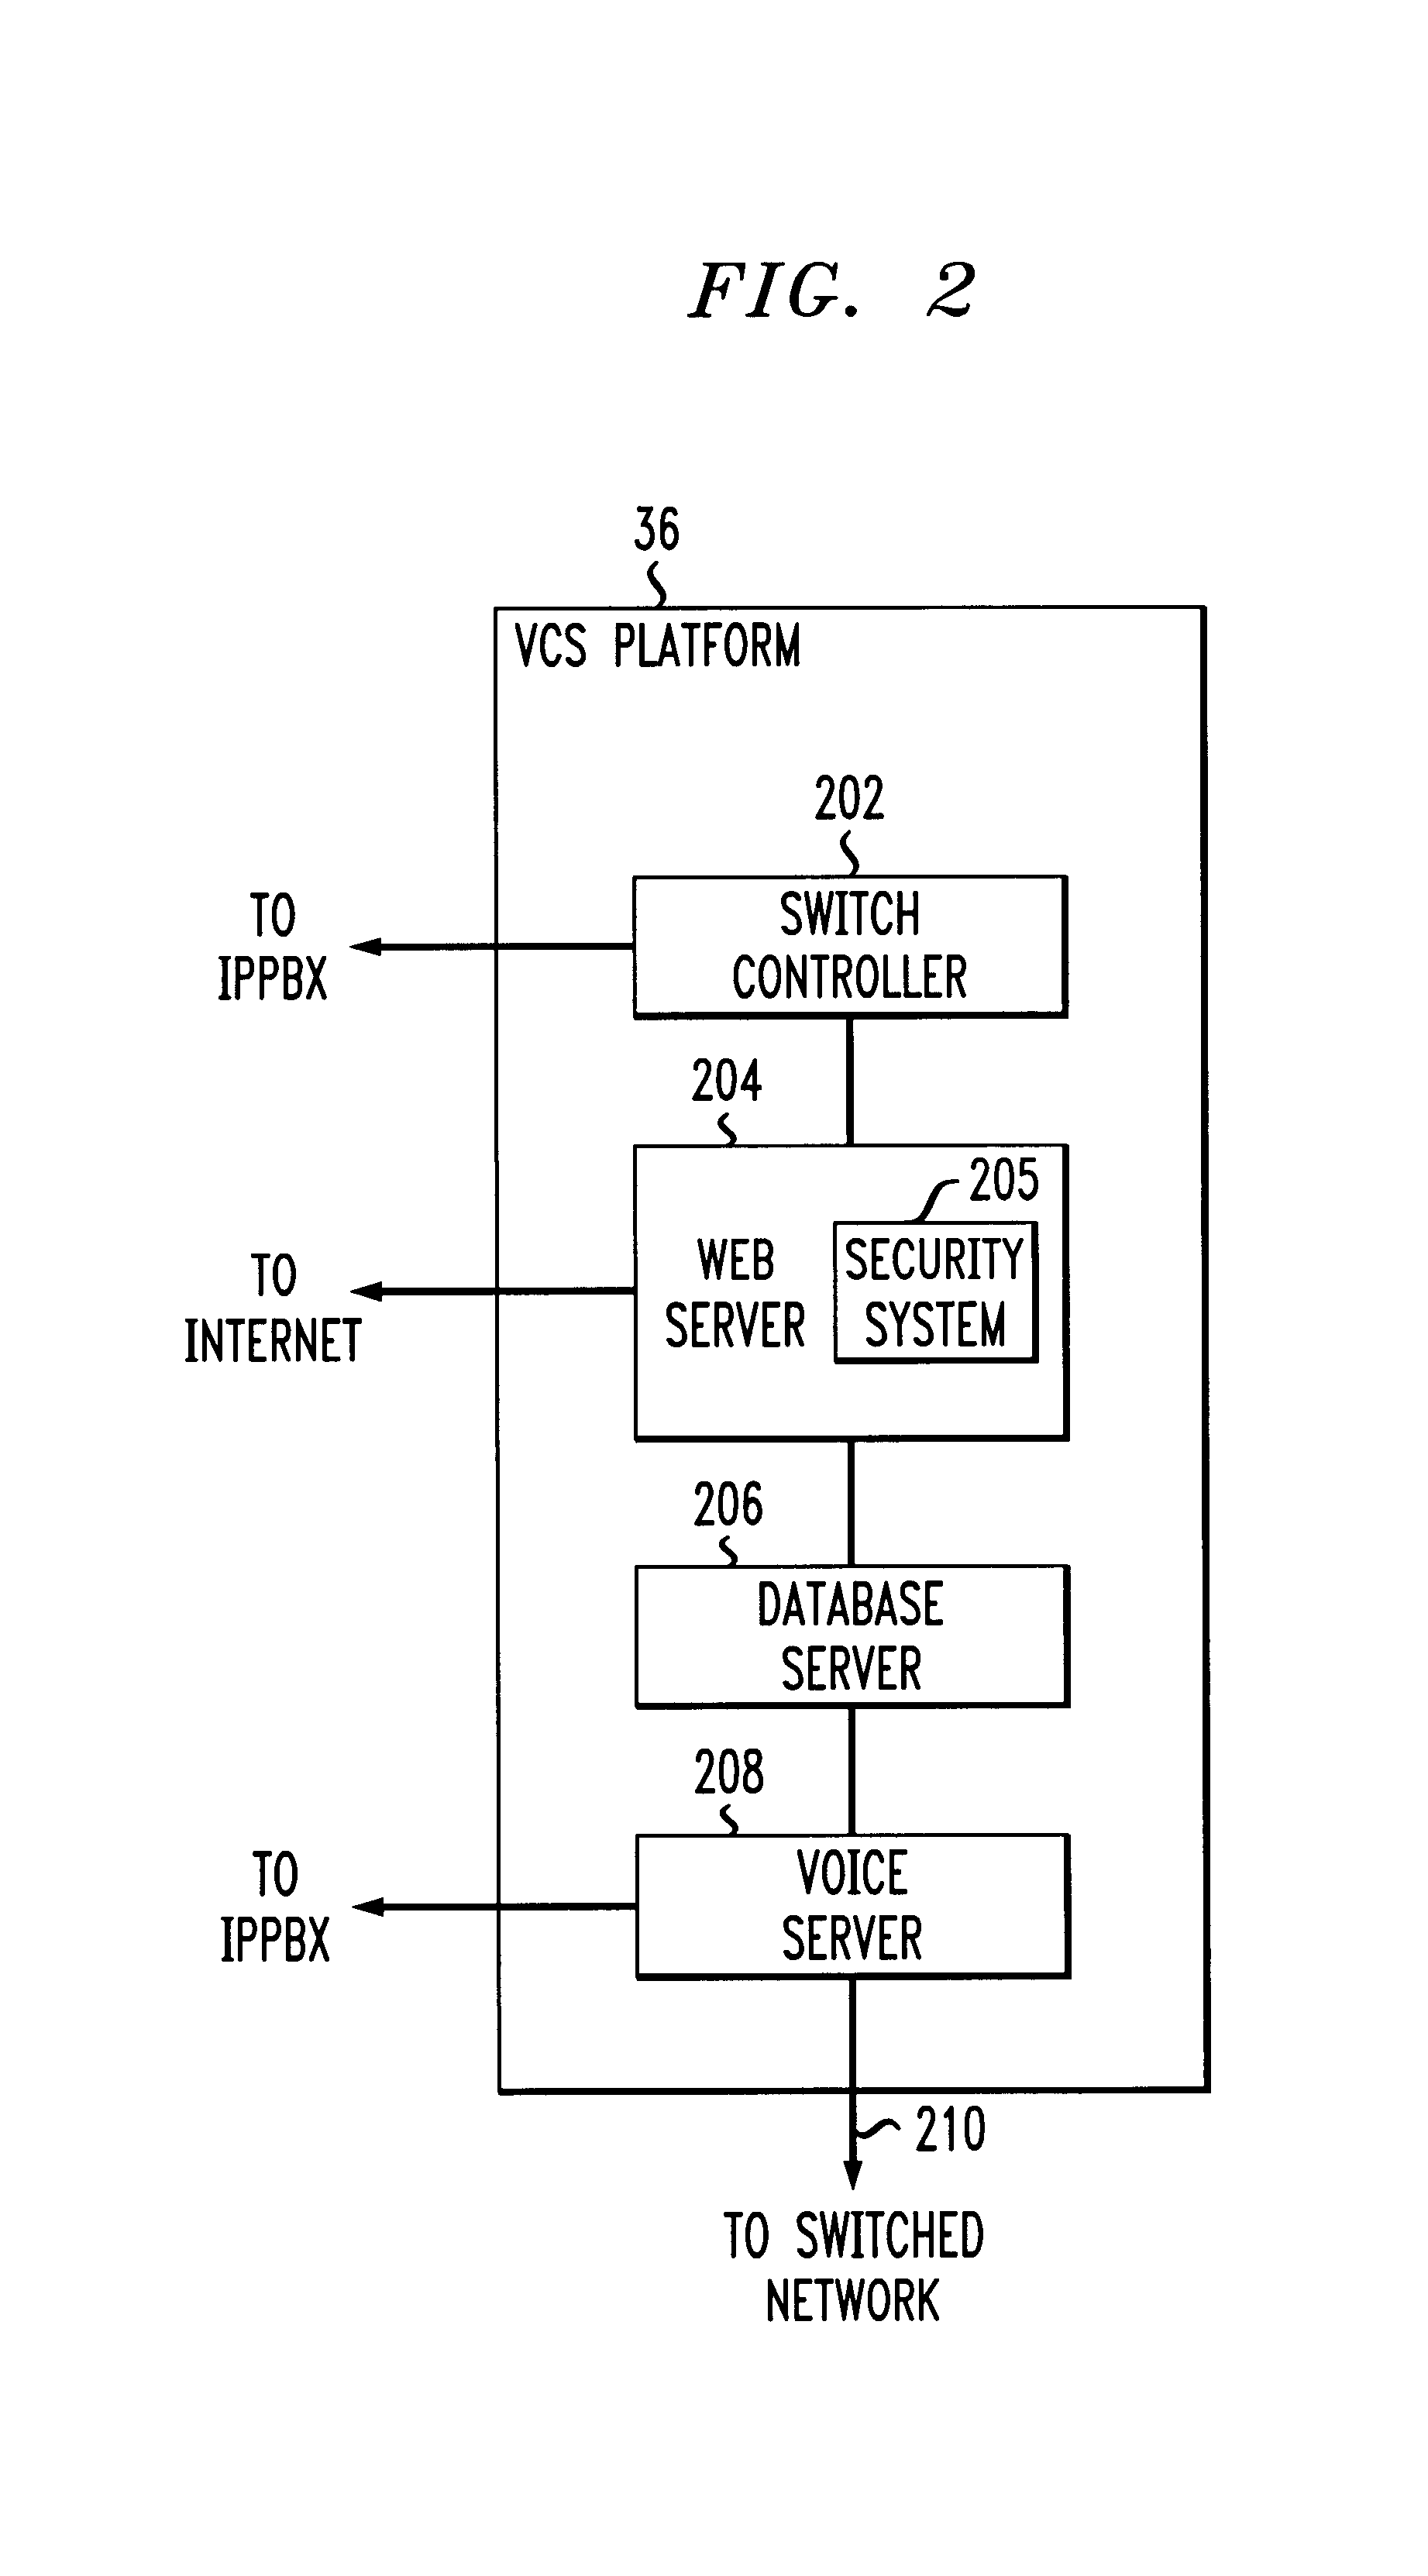 Method for handling incominc calls directed to a virtual communication service subscriber via a shared line system